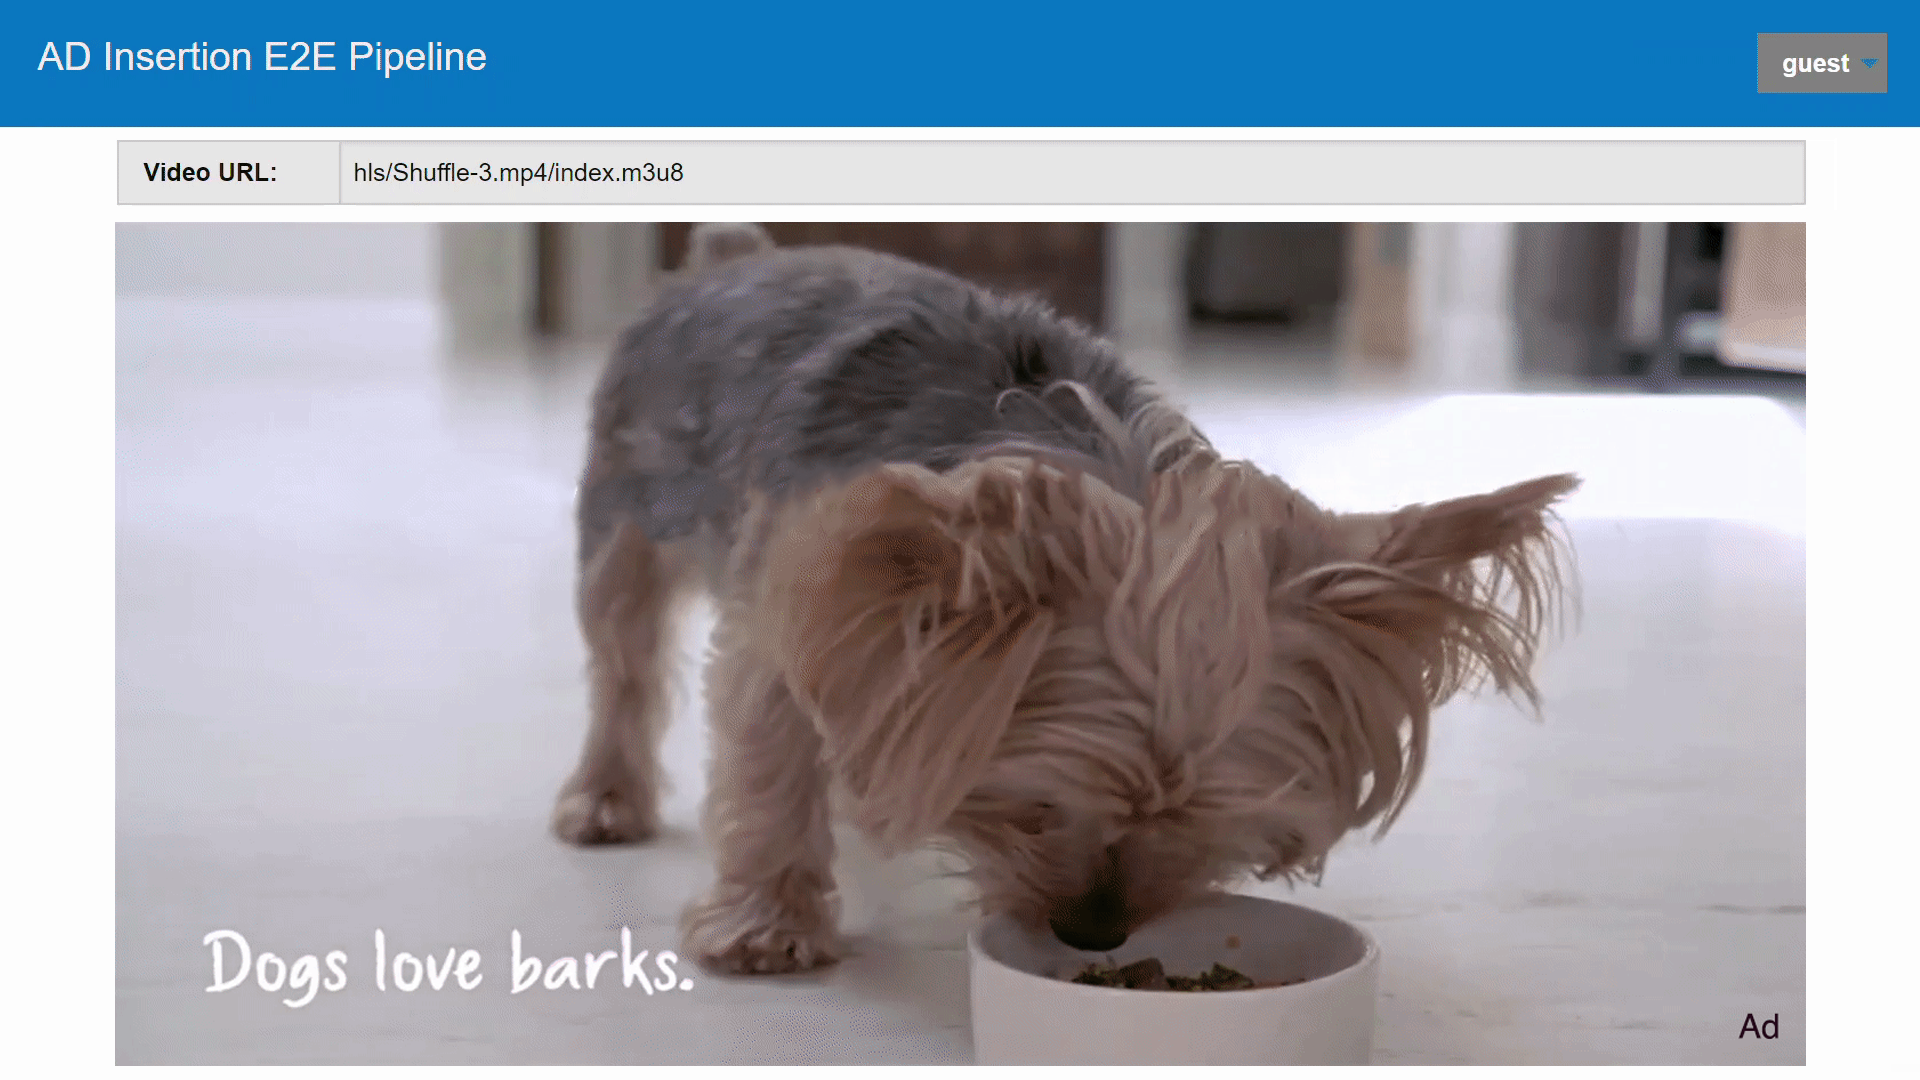 Ad Insertion Sample image of dog eating with the words "Dogs love barks."